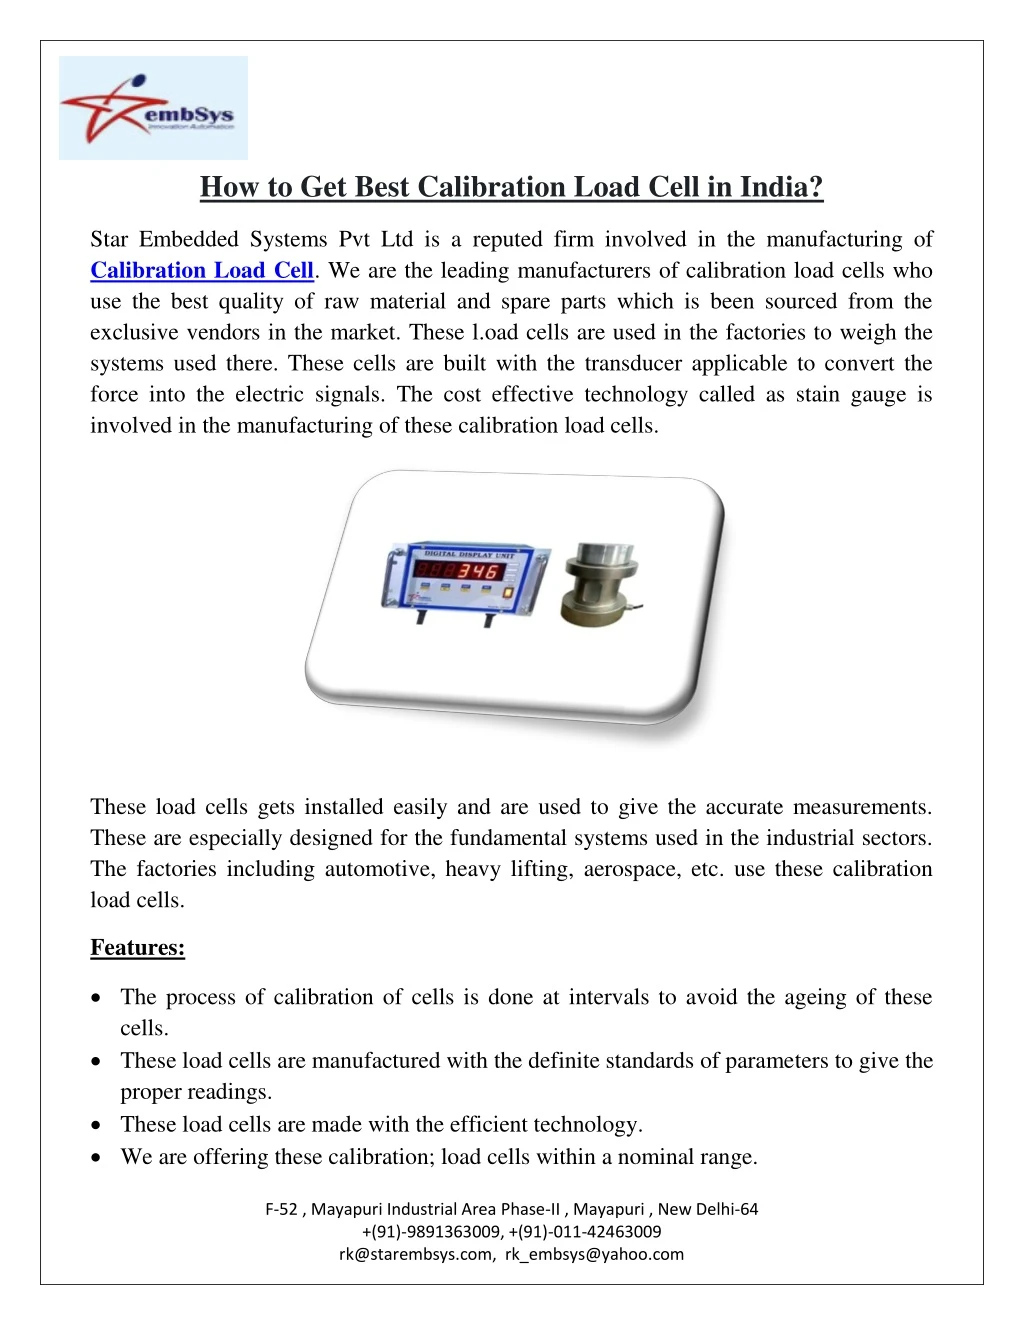 how to get best calibration load cell in india